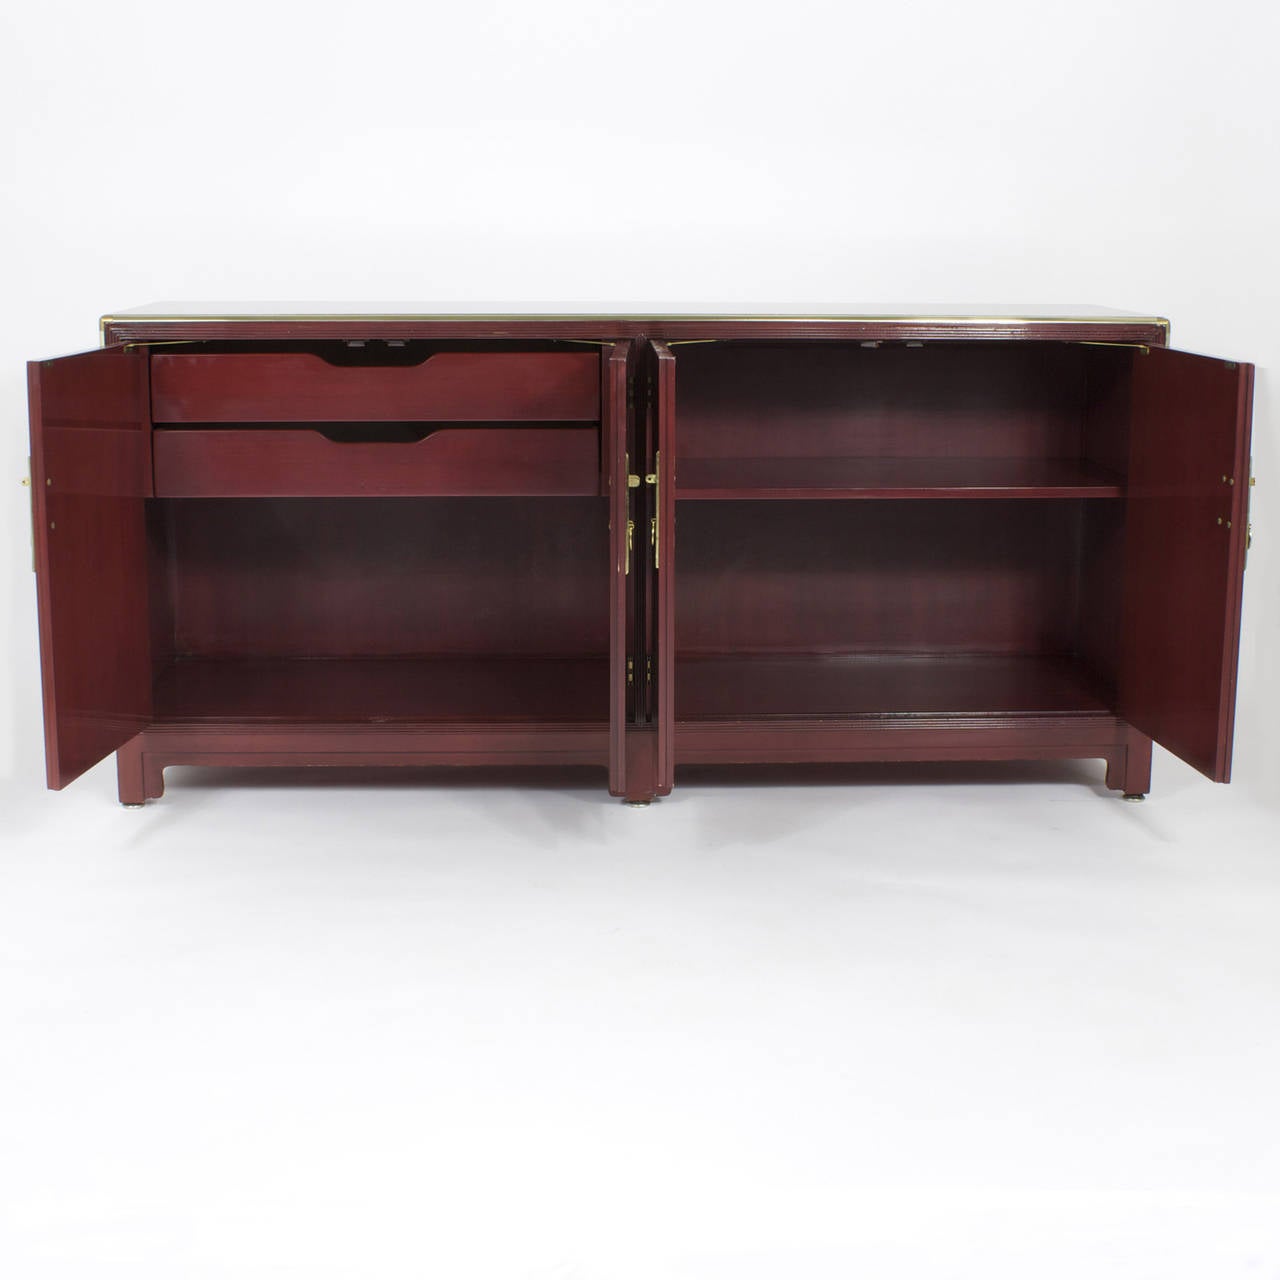 20th Century Red Lacquer Asian Style Sideboard